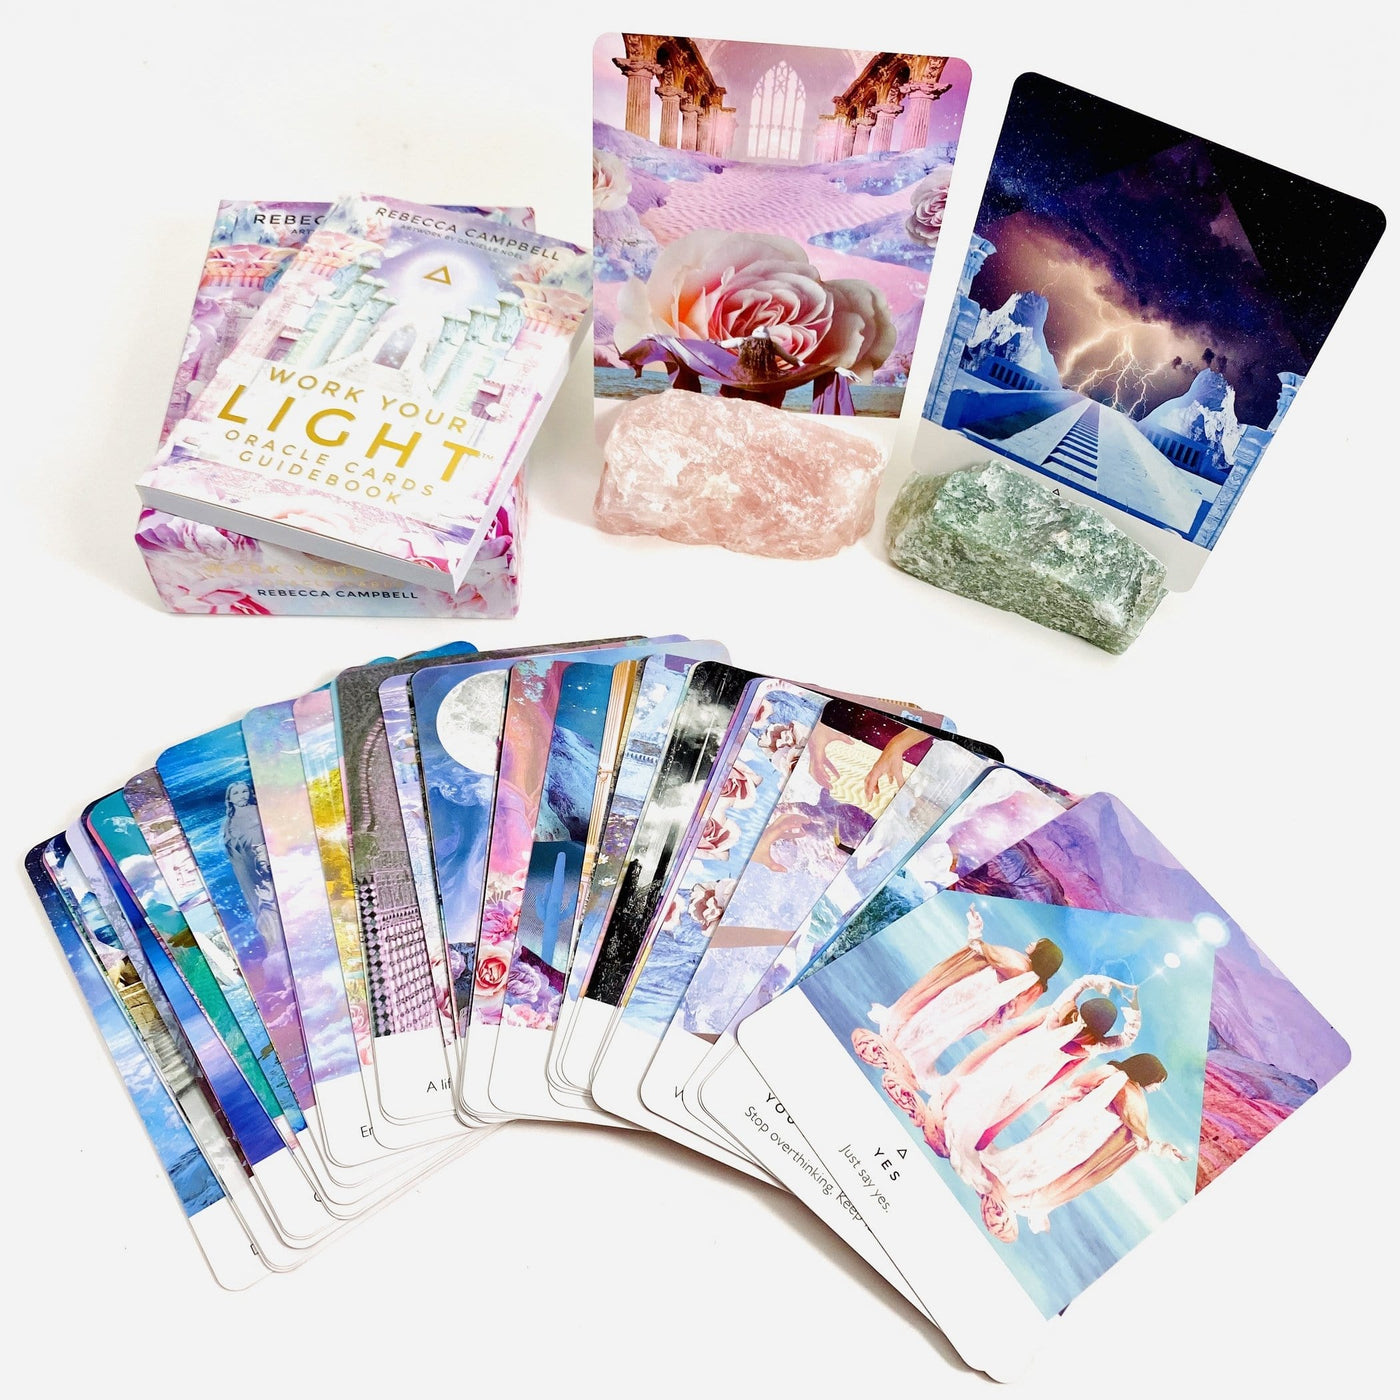 Work Your Light Oracle Cards with decorations on white background